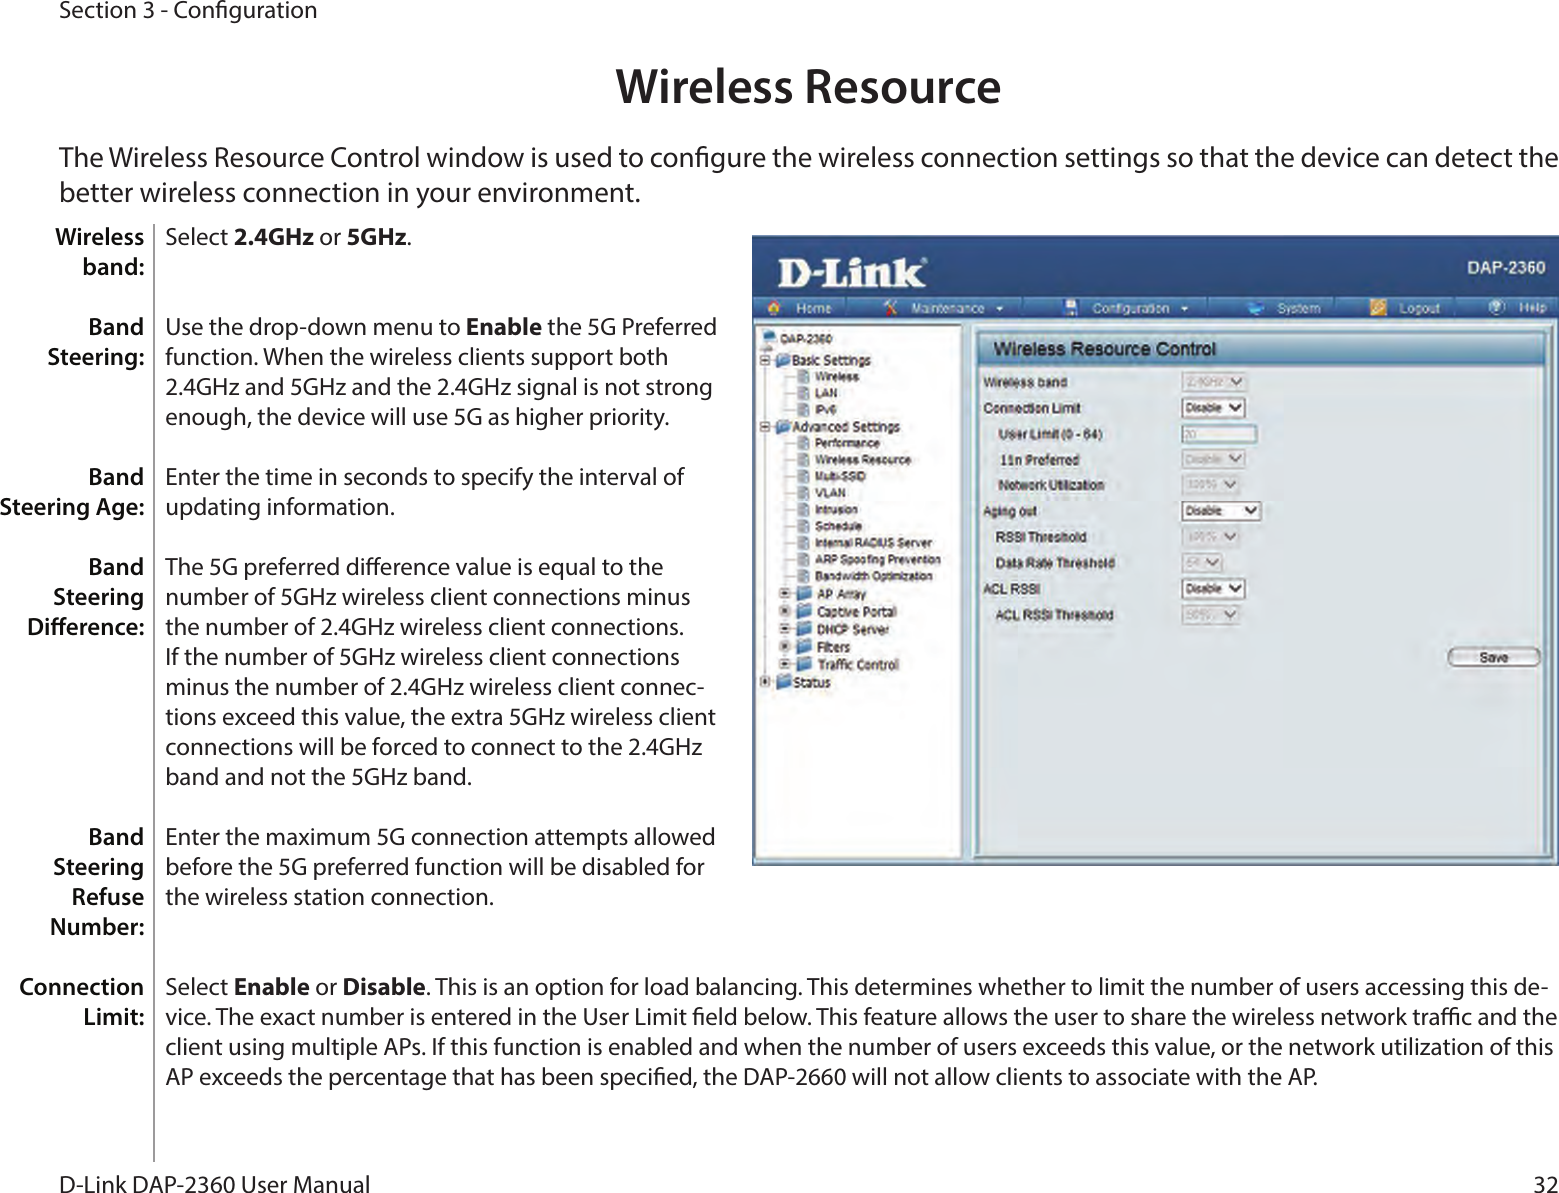 32D-Link DAP-2360 User ManualSection 3 - CongurationWireless ResourceThe Wireless Resource Control window is used to congure the wireless connection settings so that the device can detect the better wireless connection in your environment.Select 2.4GHz or 5GHz.Use the drop-down menu to Enable the 5G Preferred function. When the wireless clients support both 2.4GHz and 5GHz and the 2.4GHz signal is not strong enough, the device will use 5G as higher priority.Enter the time in seconds to specify the interval of updating information.The 5G preferred dierence value is equal to the number of 5GHz wireless client connections minus the number of 2.4GHz wireless client connections. If the number of 5GHz wireless client connections minus the number of 2.4GHz wireless client connec-tions exceed this value, the extra 5GHz wireless client connections will be forced to connect to the 2.4GHz band and not the 5GHz band.Enter the maximum 5G connection attempts allowed before the 5G preferred function will be disabled for the wireless station connection.Select Enable or Disable. This is an option for load balancing. This determines whether to limit the number of users accessing this de-vice. The exact number is entered in the User Limit eld below. This feature allows the user to share the wireless network trac and the client using multiple APs. If this function is enabled and when the number of users exceeds this value, or the network utilization of this AP exceeds the percentage that has been specied, the DAP-2660 will not allow clients to associate with the AP.Wireless band:Band Steering:Band Steering Age:Band Steering Dierence:Band Steering Refuse Number:Connection Limit: